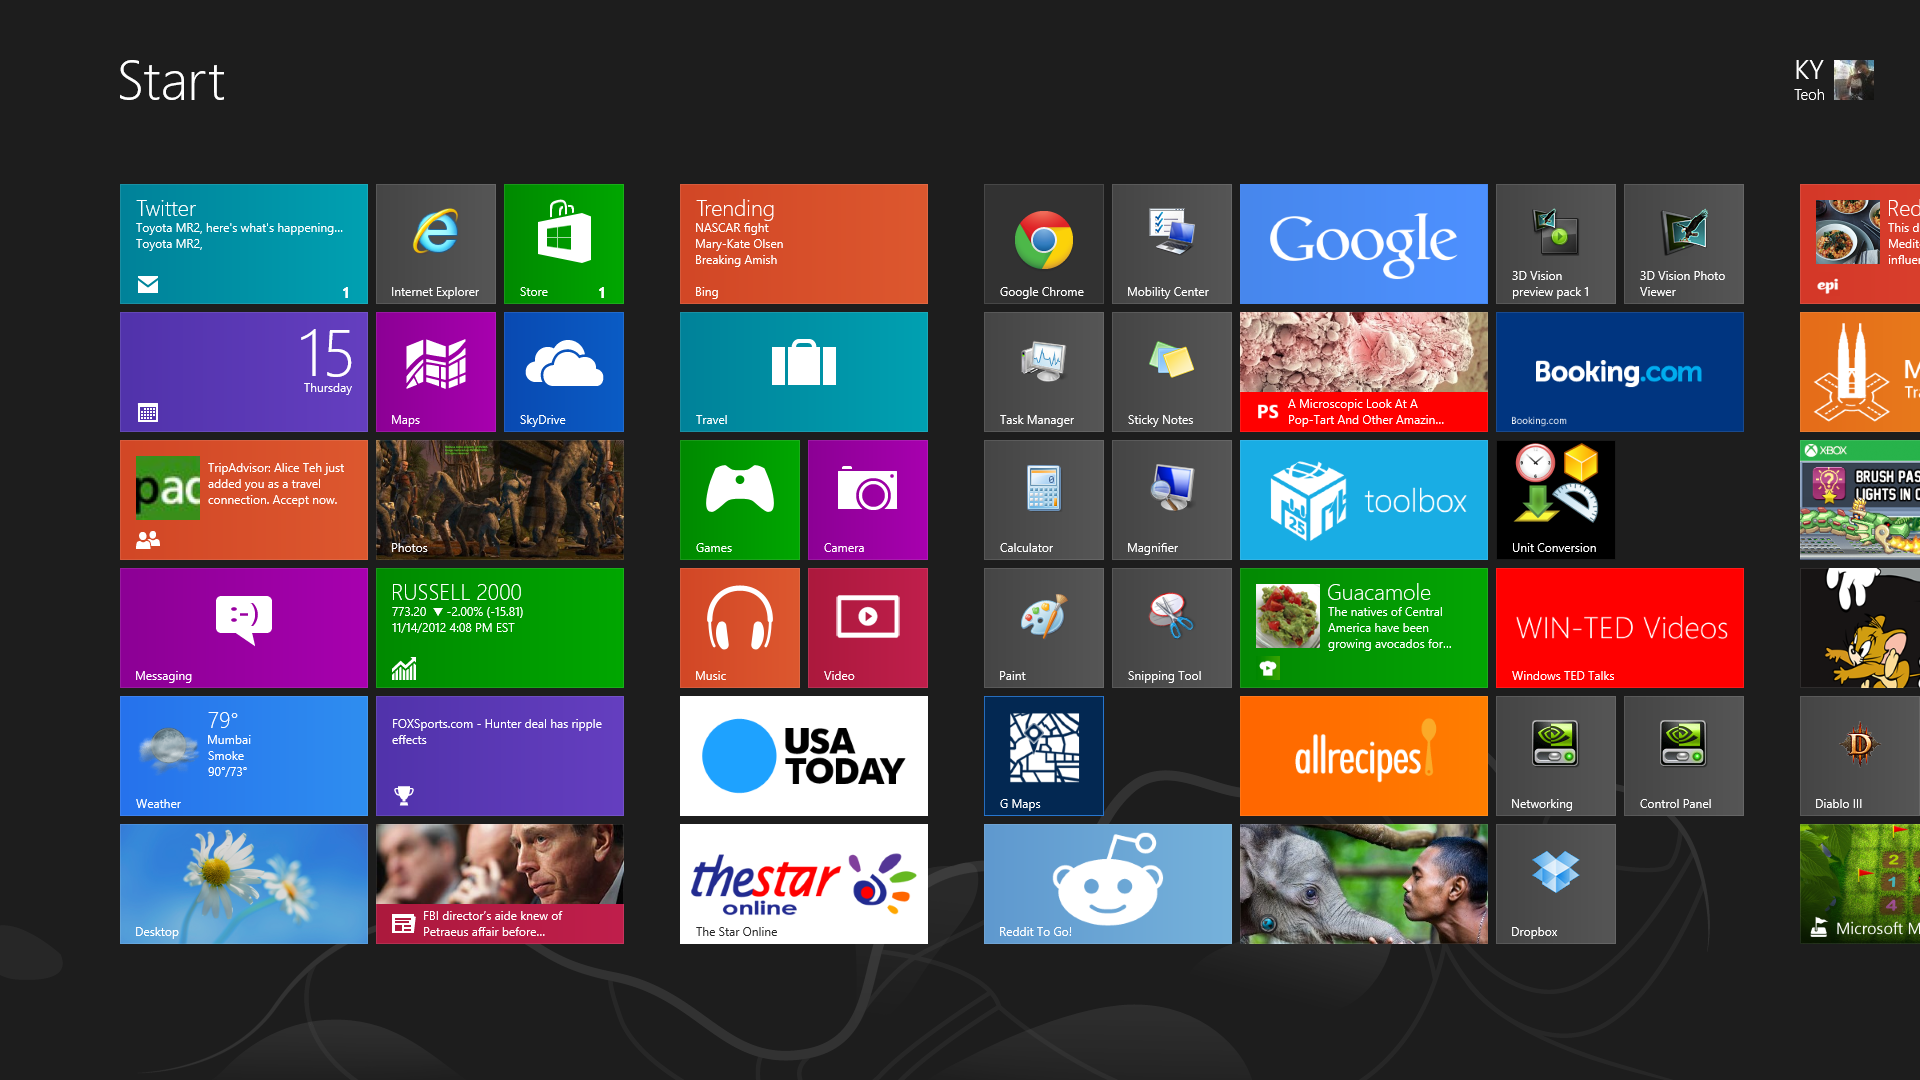 10 things I like about Windows 8